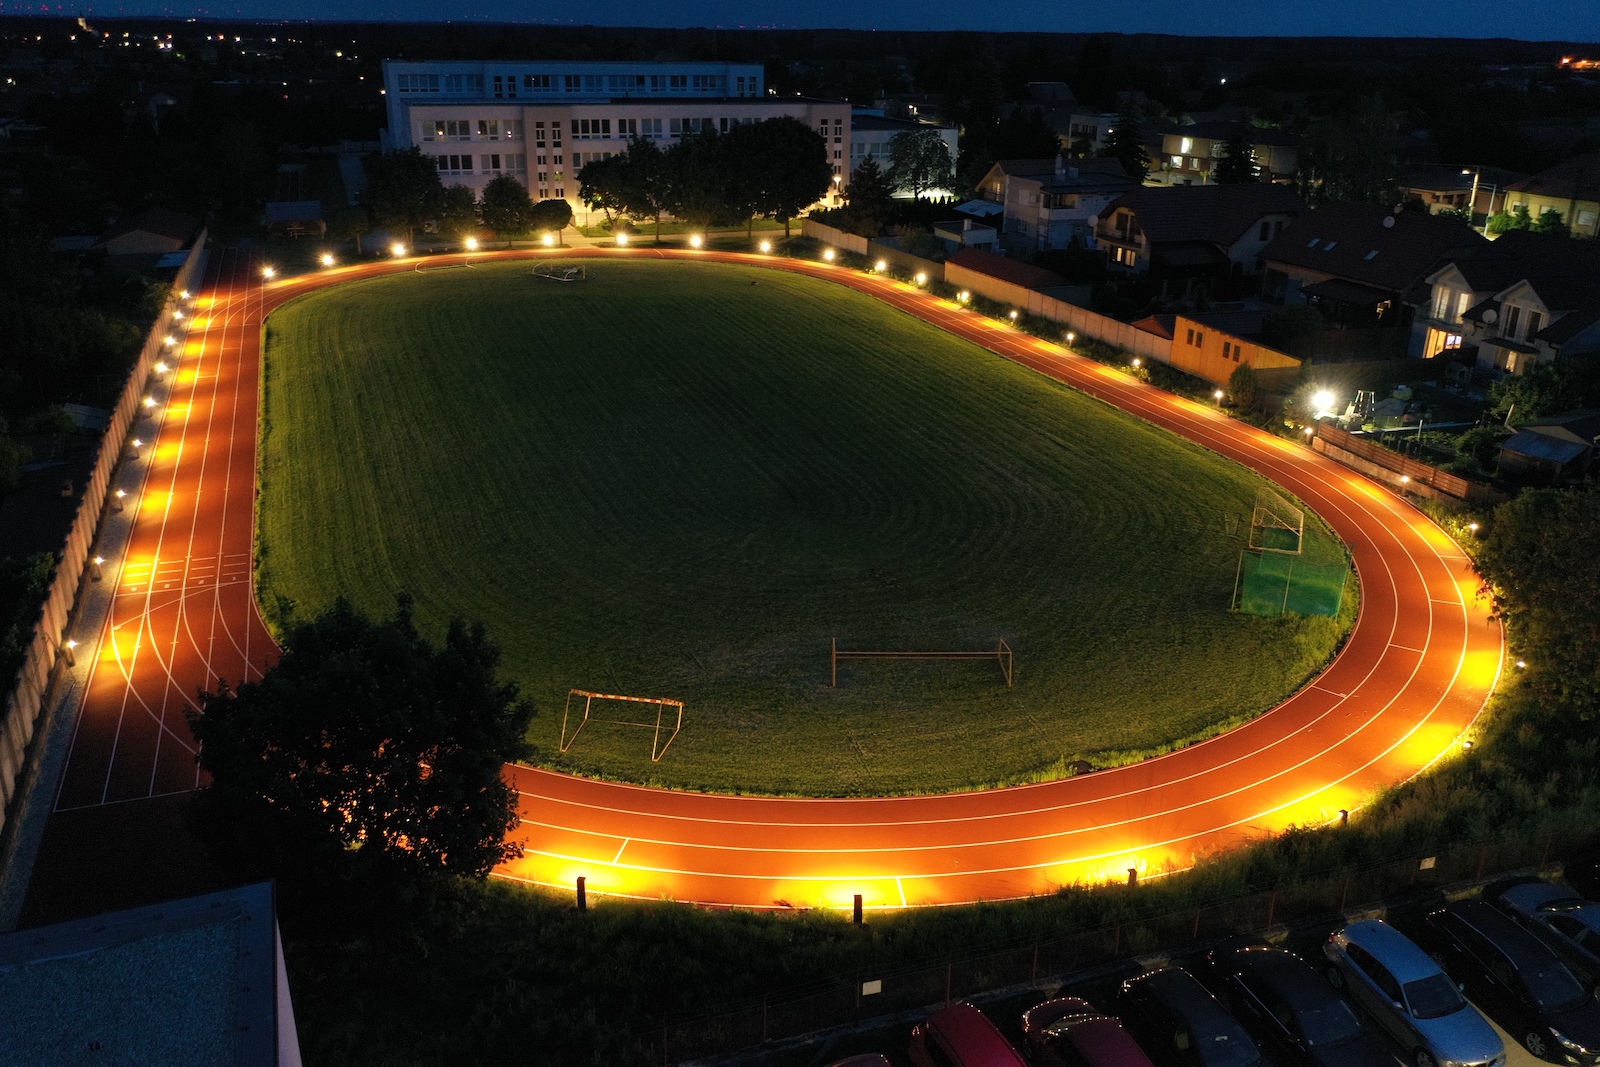 Lighting of the athletic track in the premises of the Záhorácka primary school